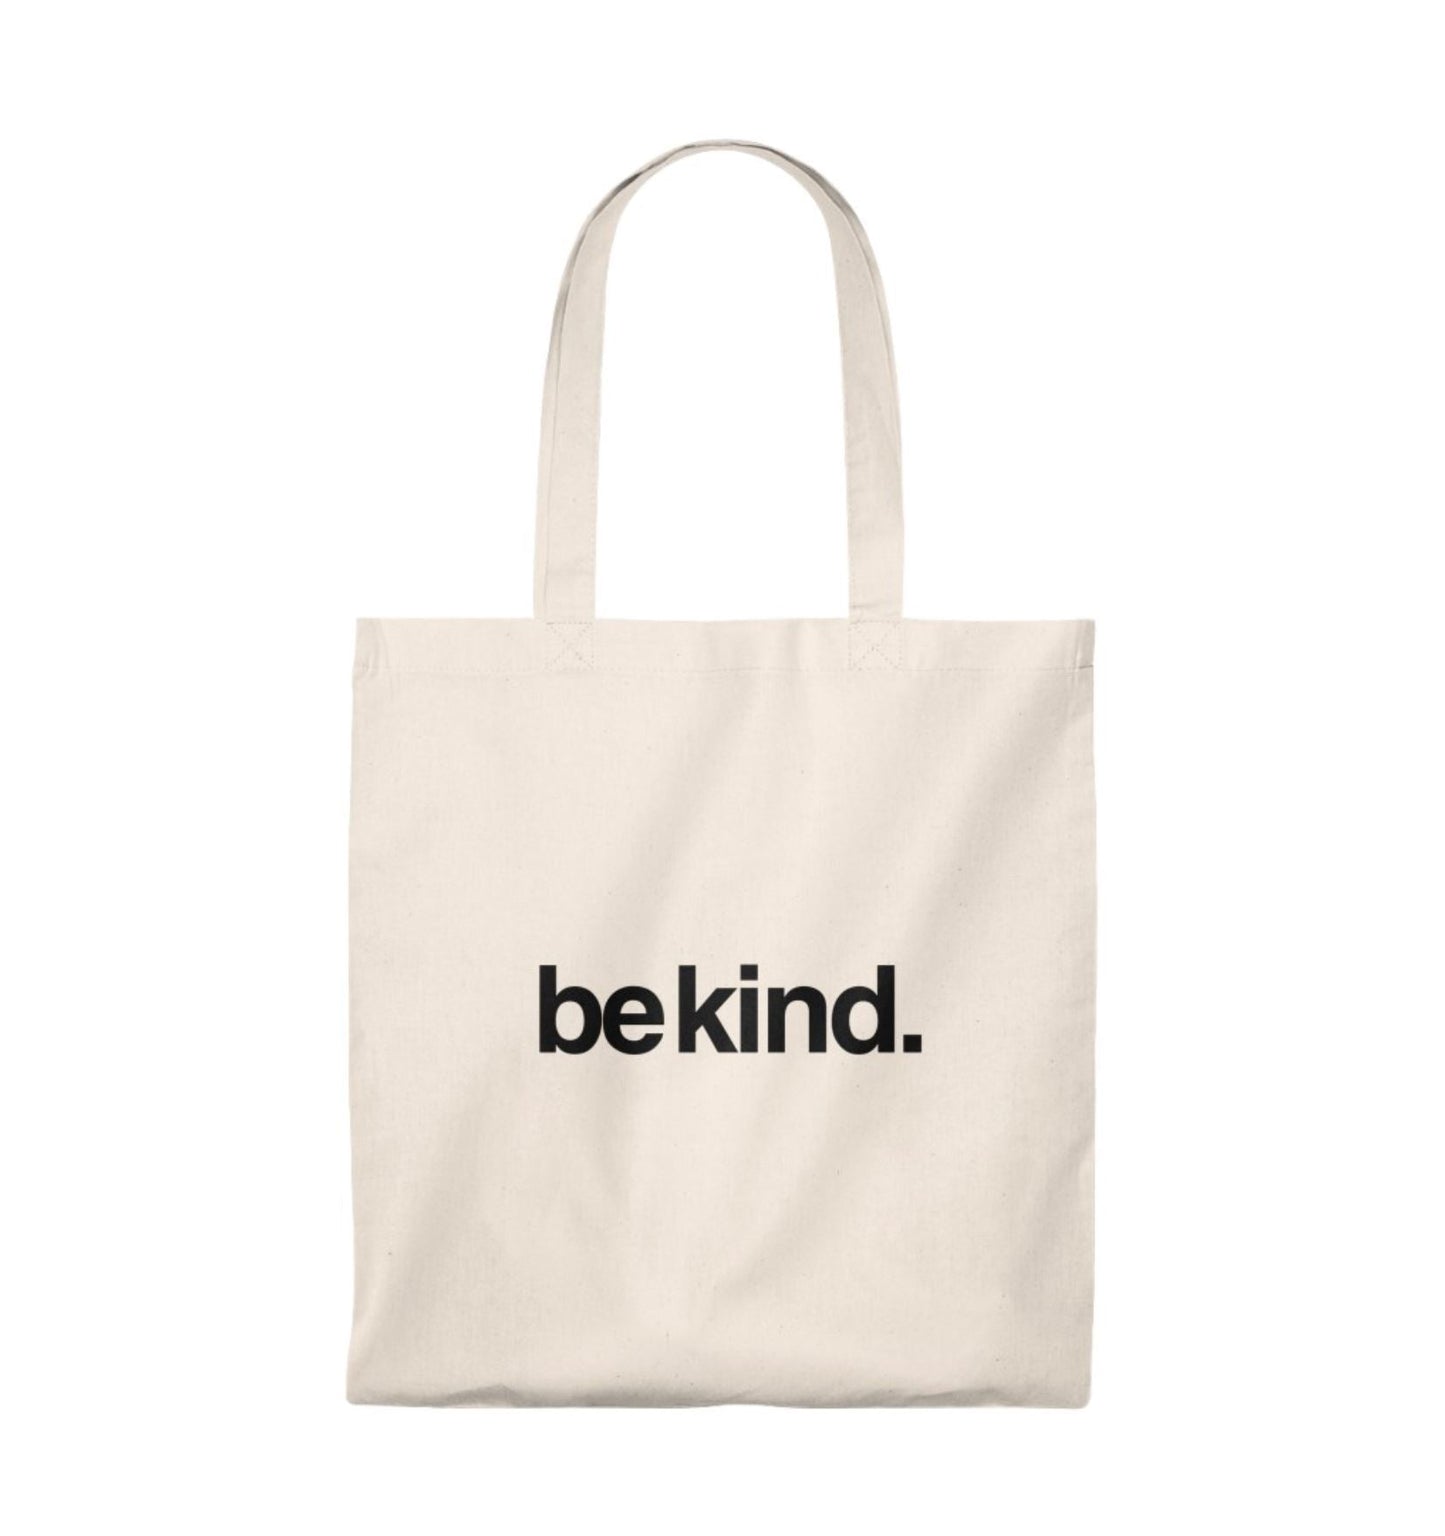 Be Kind | Tote Bag by The Happy Givers